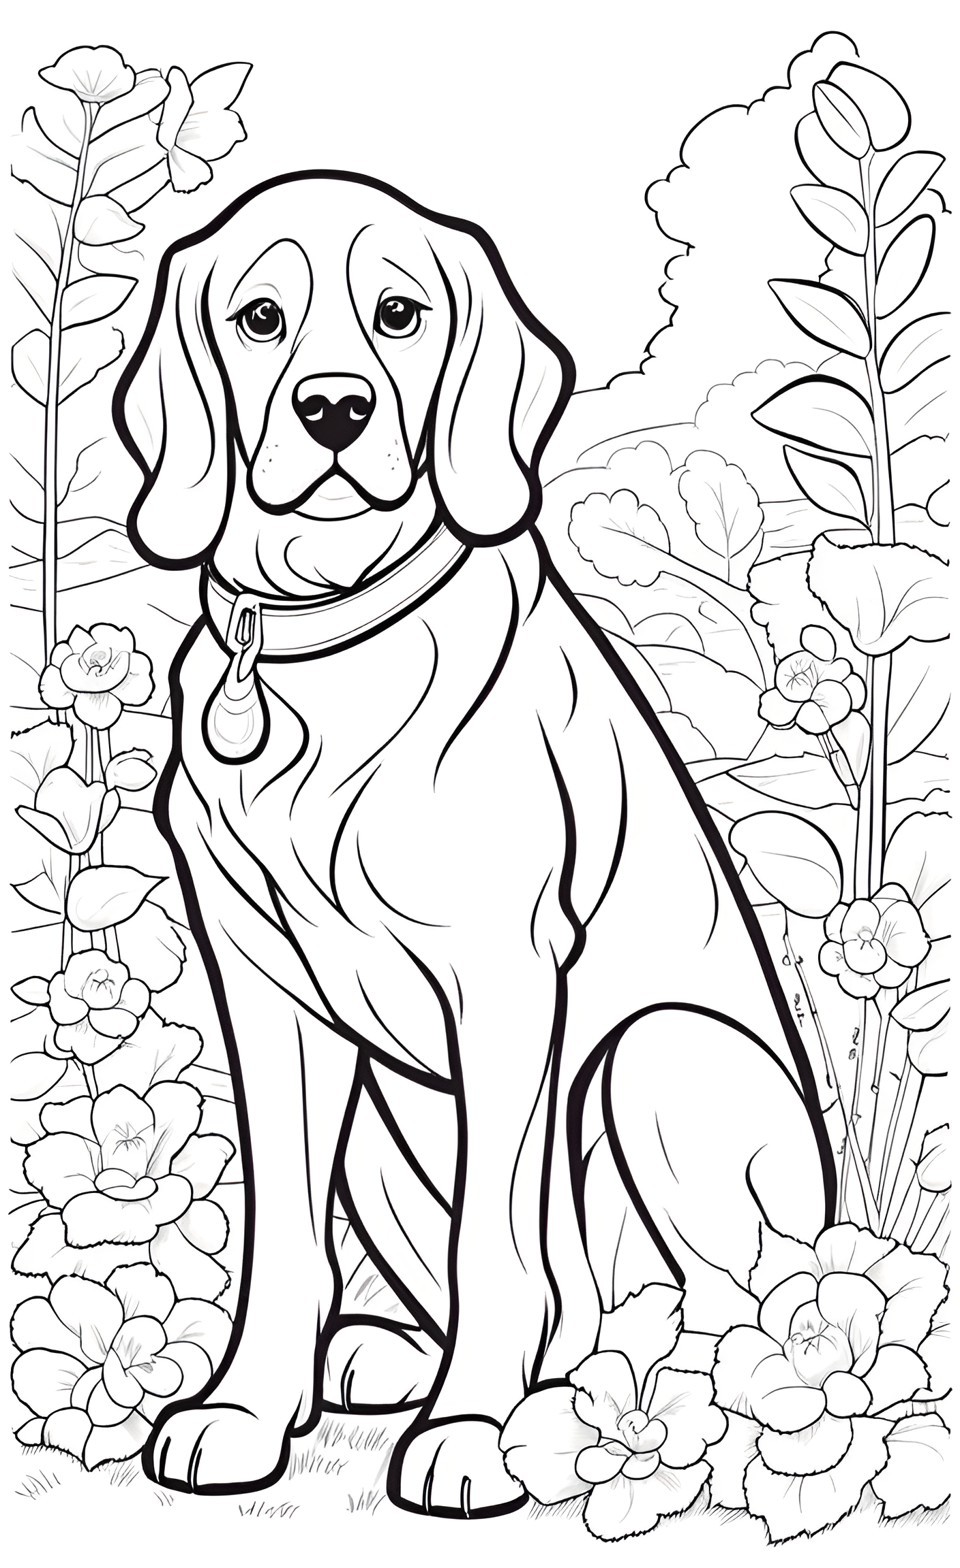 Free Animal Coloring Page #8 | Cute Animals Coloring Pages